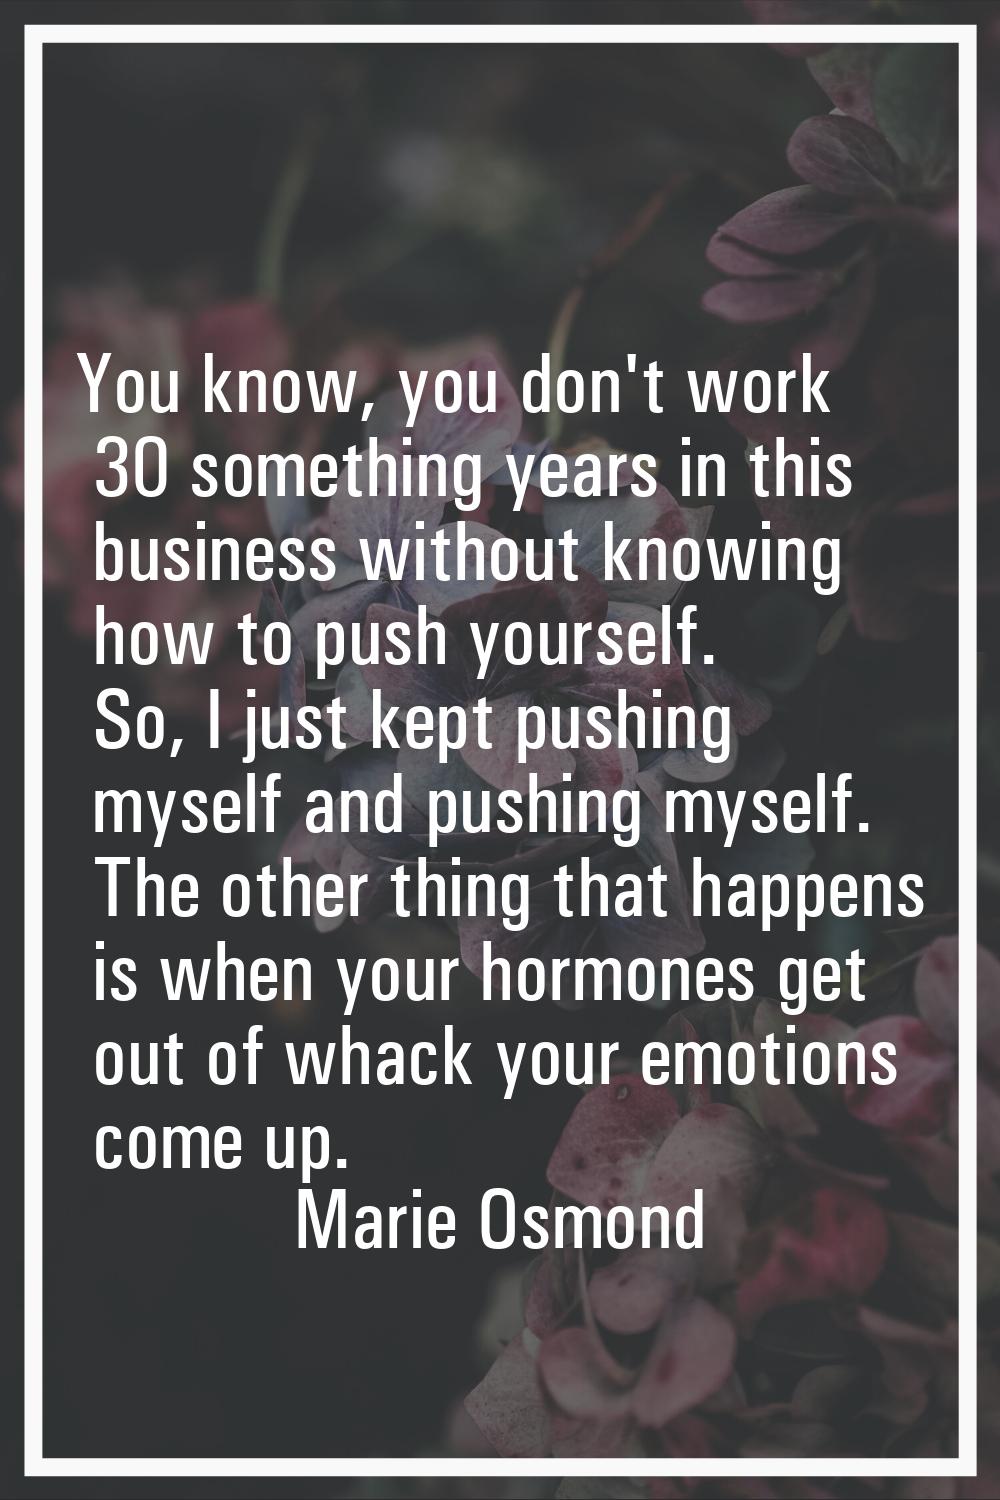 You know, you don't work 30 something years in this business without knowing how to push yourself. 